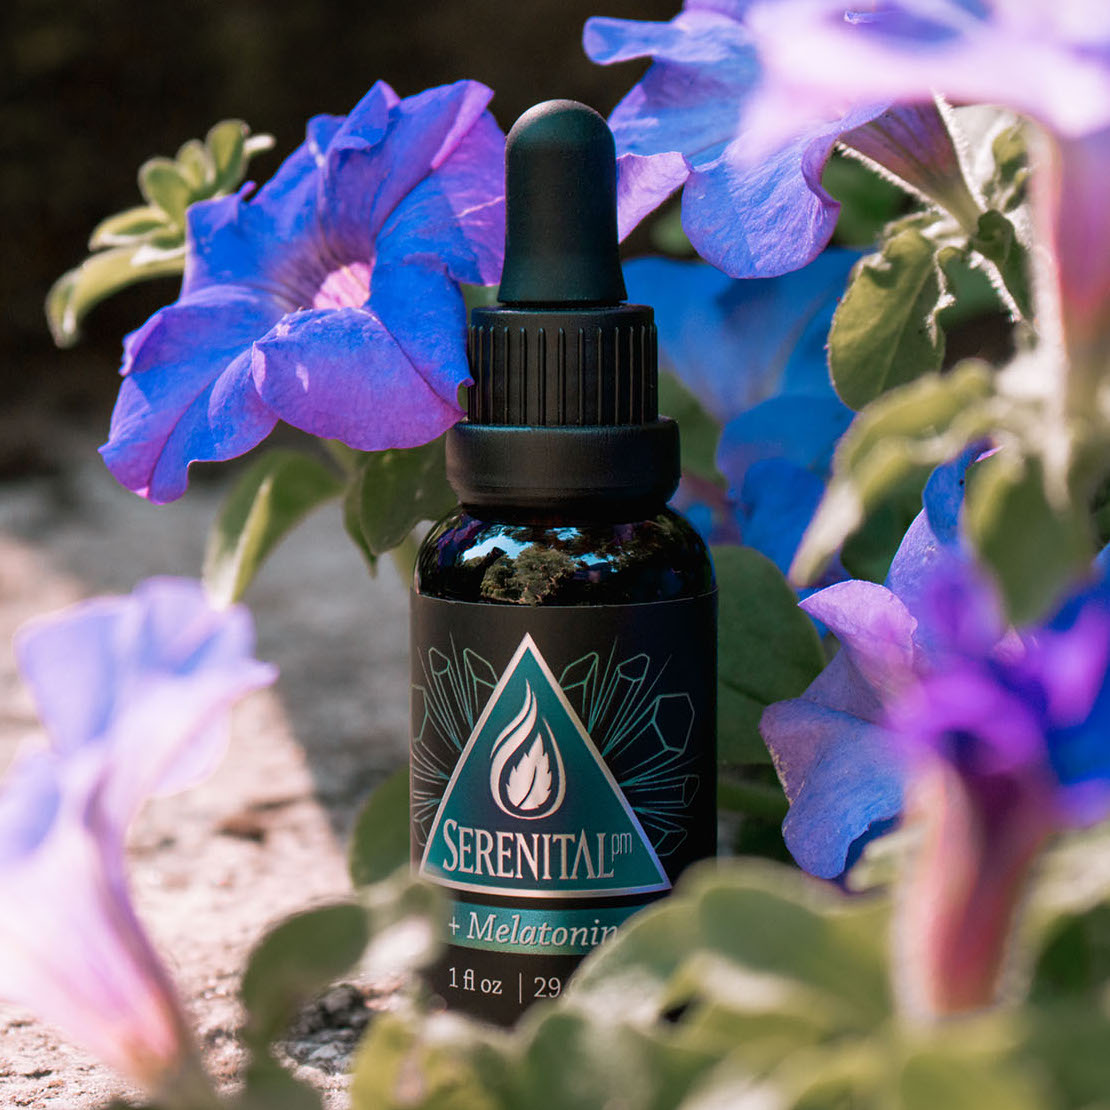 A bottle of Serenital CBD + Melatonin sits on a rock amongst some deep purple and blue colored flowers. The flowers appear to be morning glory.